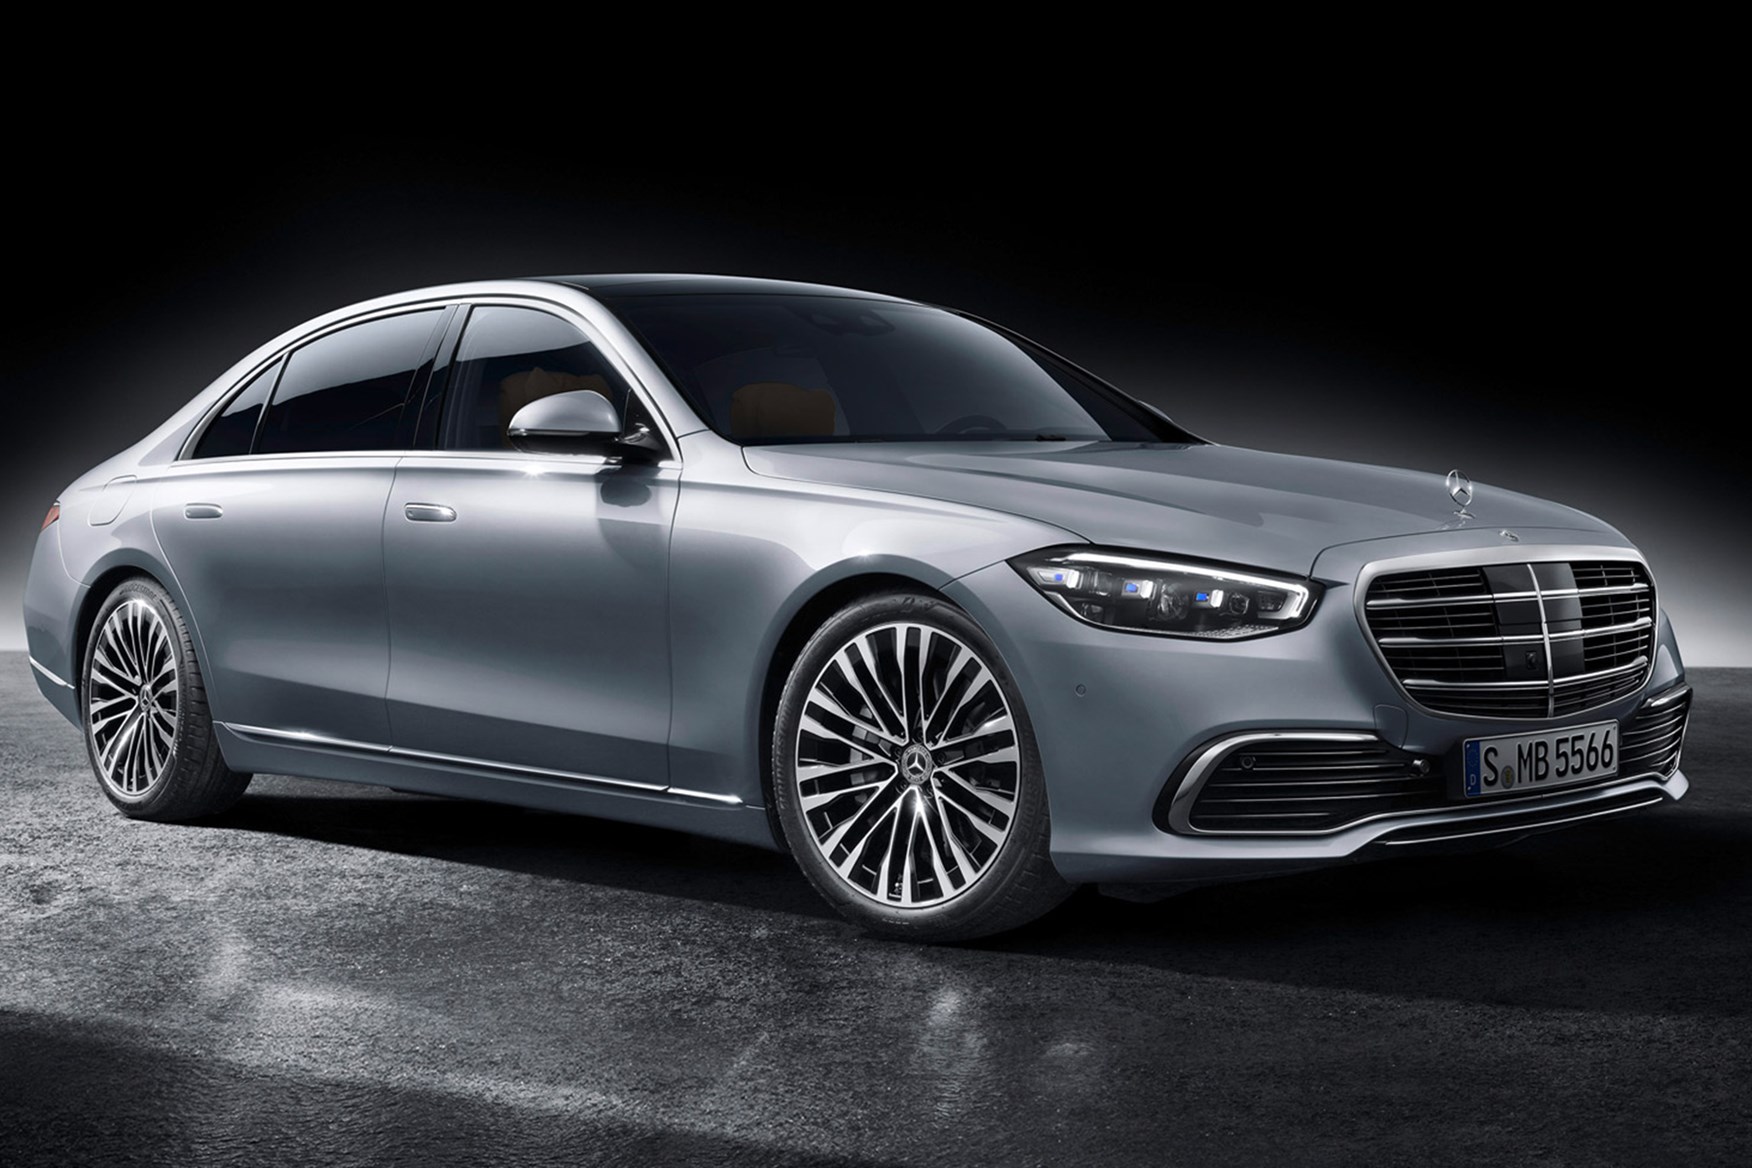 New Mercedes Benz S Class full details of new luxury car champ Parkers